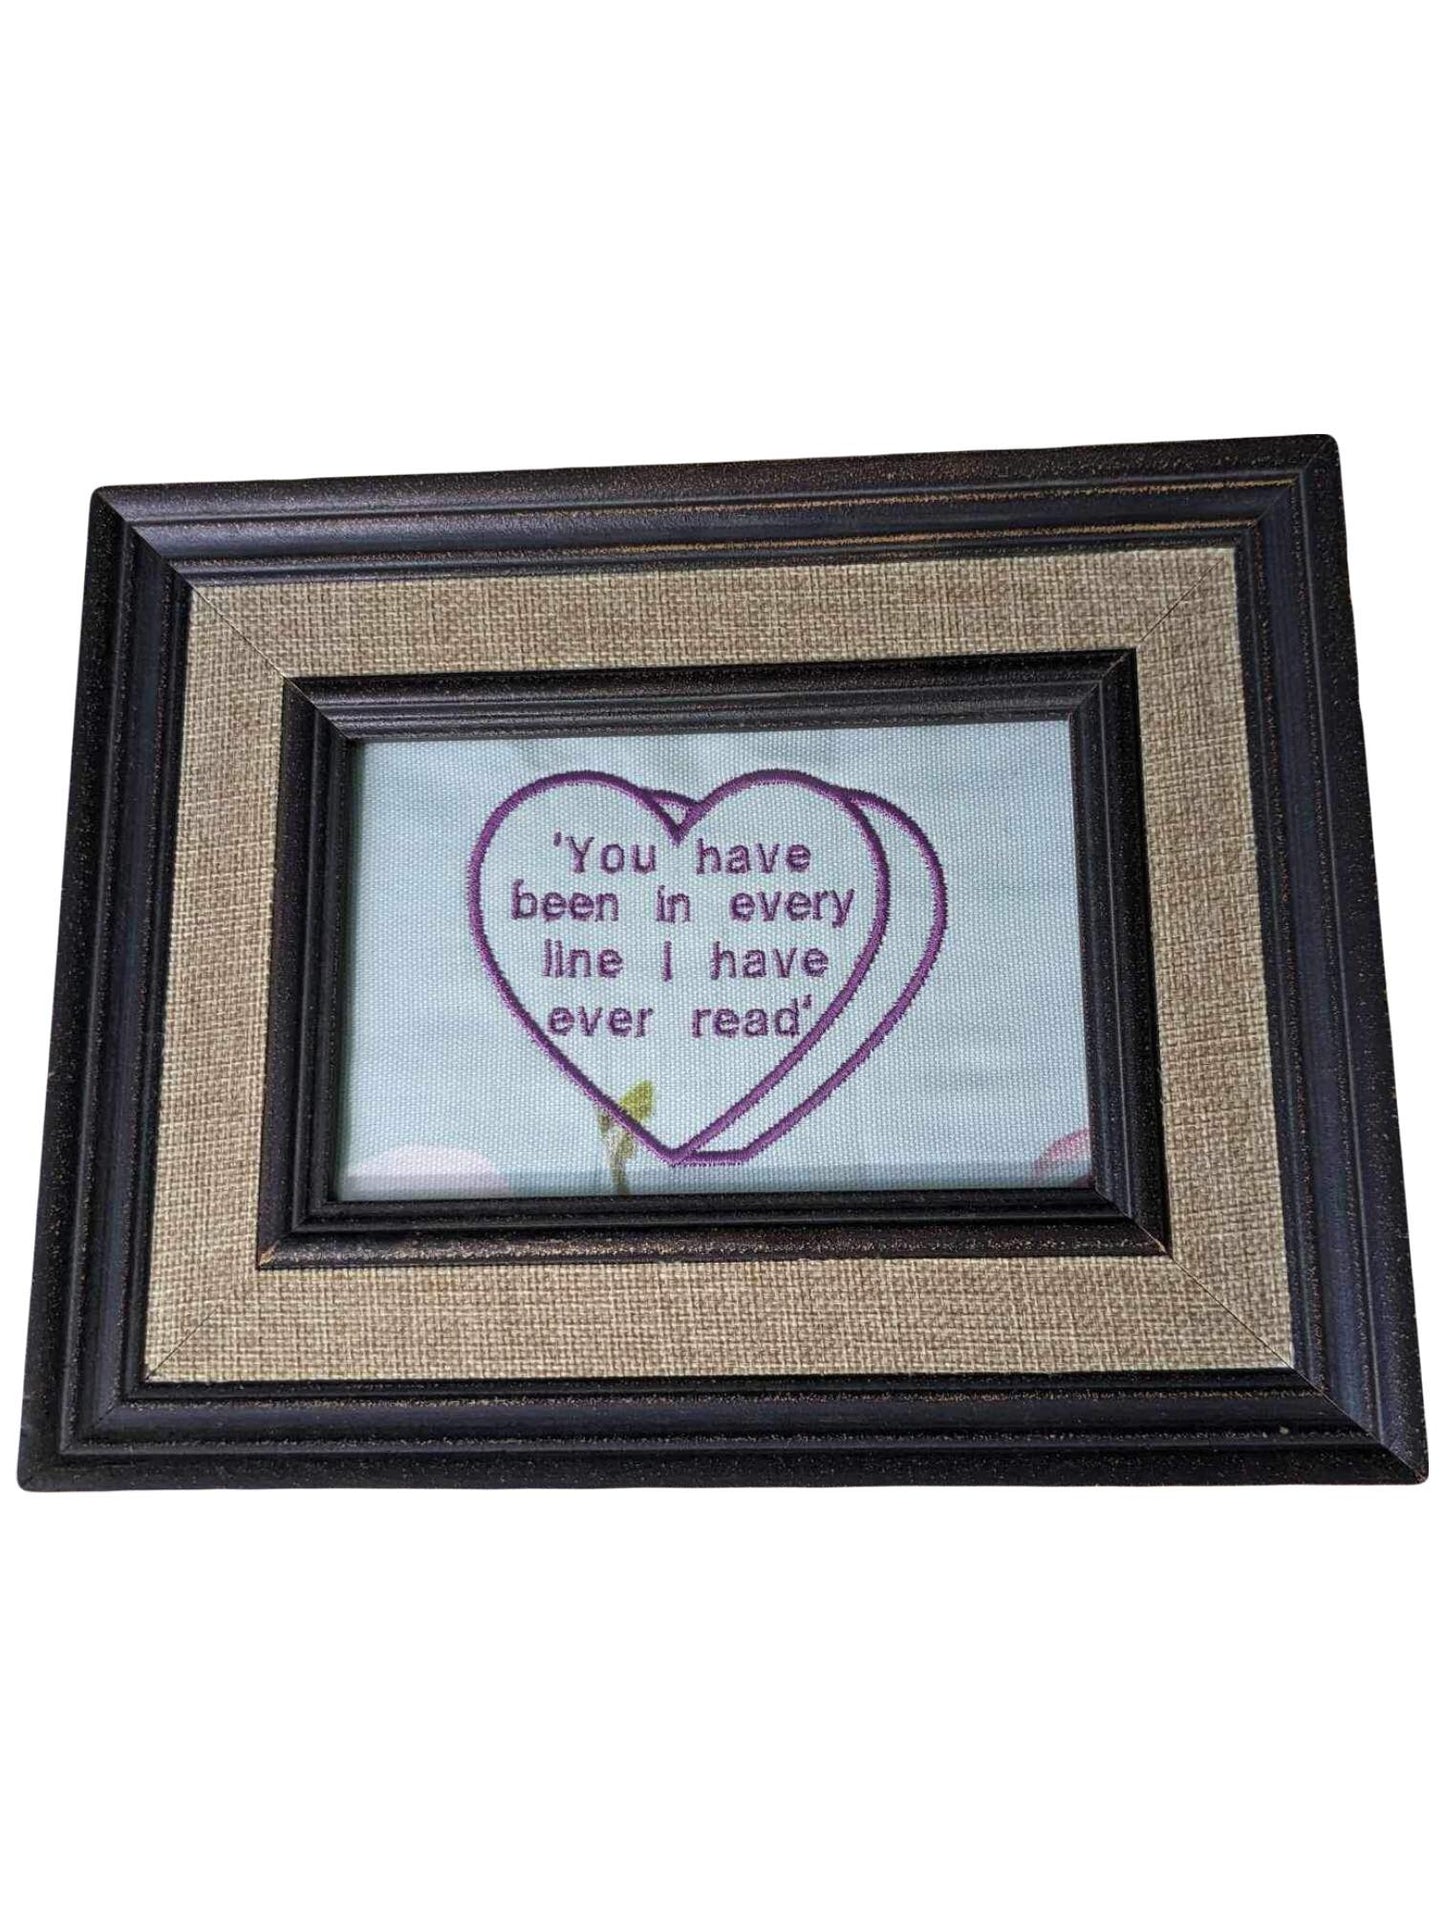 Charles Dickens - Great Expectations Upcycled Framed Art Work - Embroidered Quote About Love